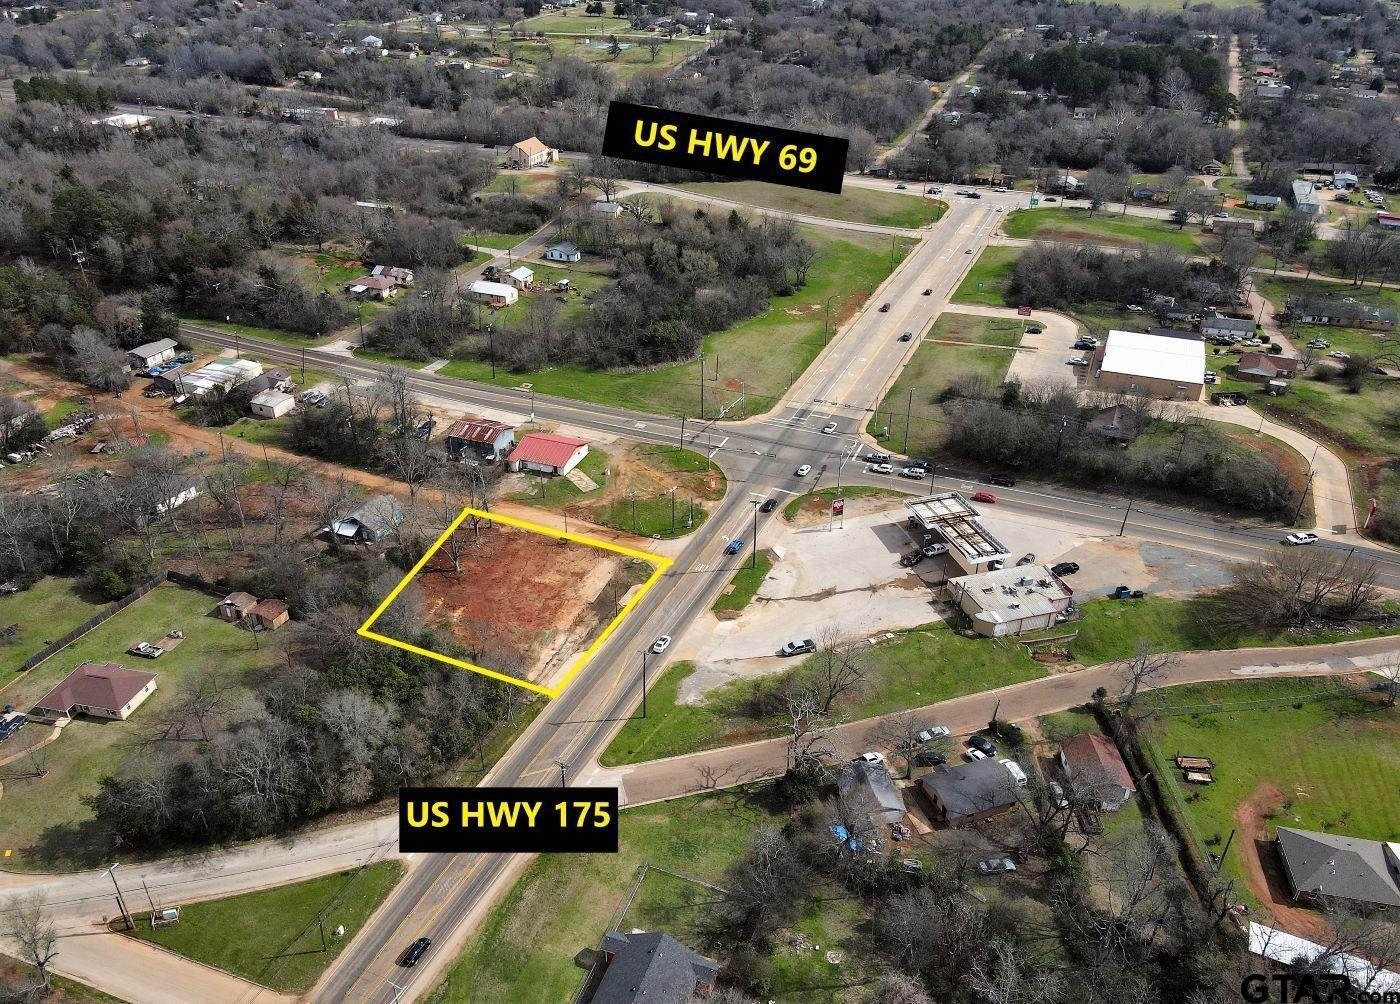 Check out this high visibility commercial lot on Hwy 175 located in Jacksonville TX. With the high volume of vehicle traffic, this location is prefect for your business ventures.